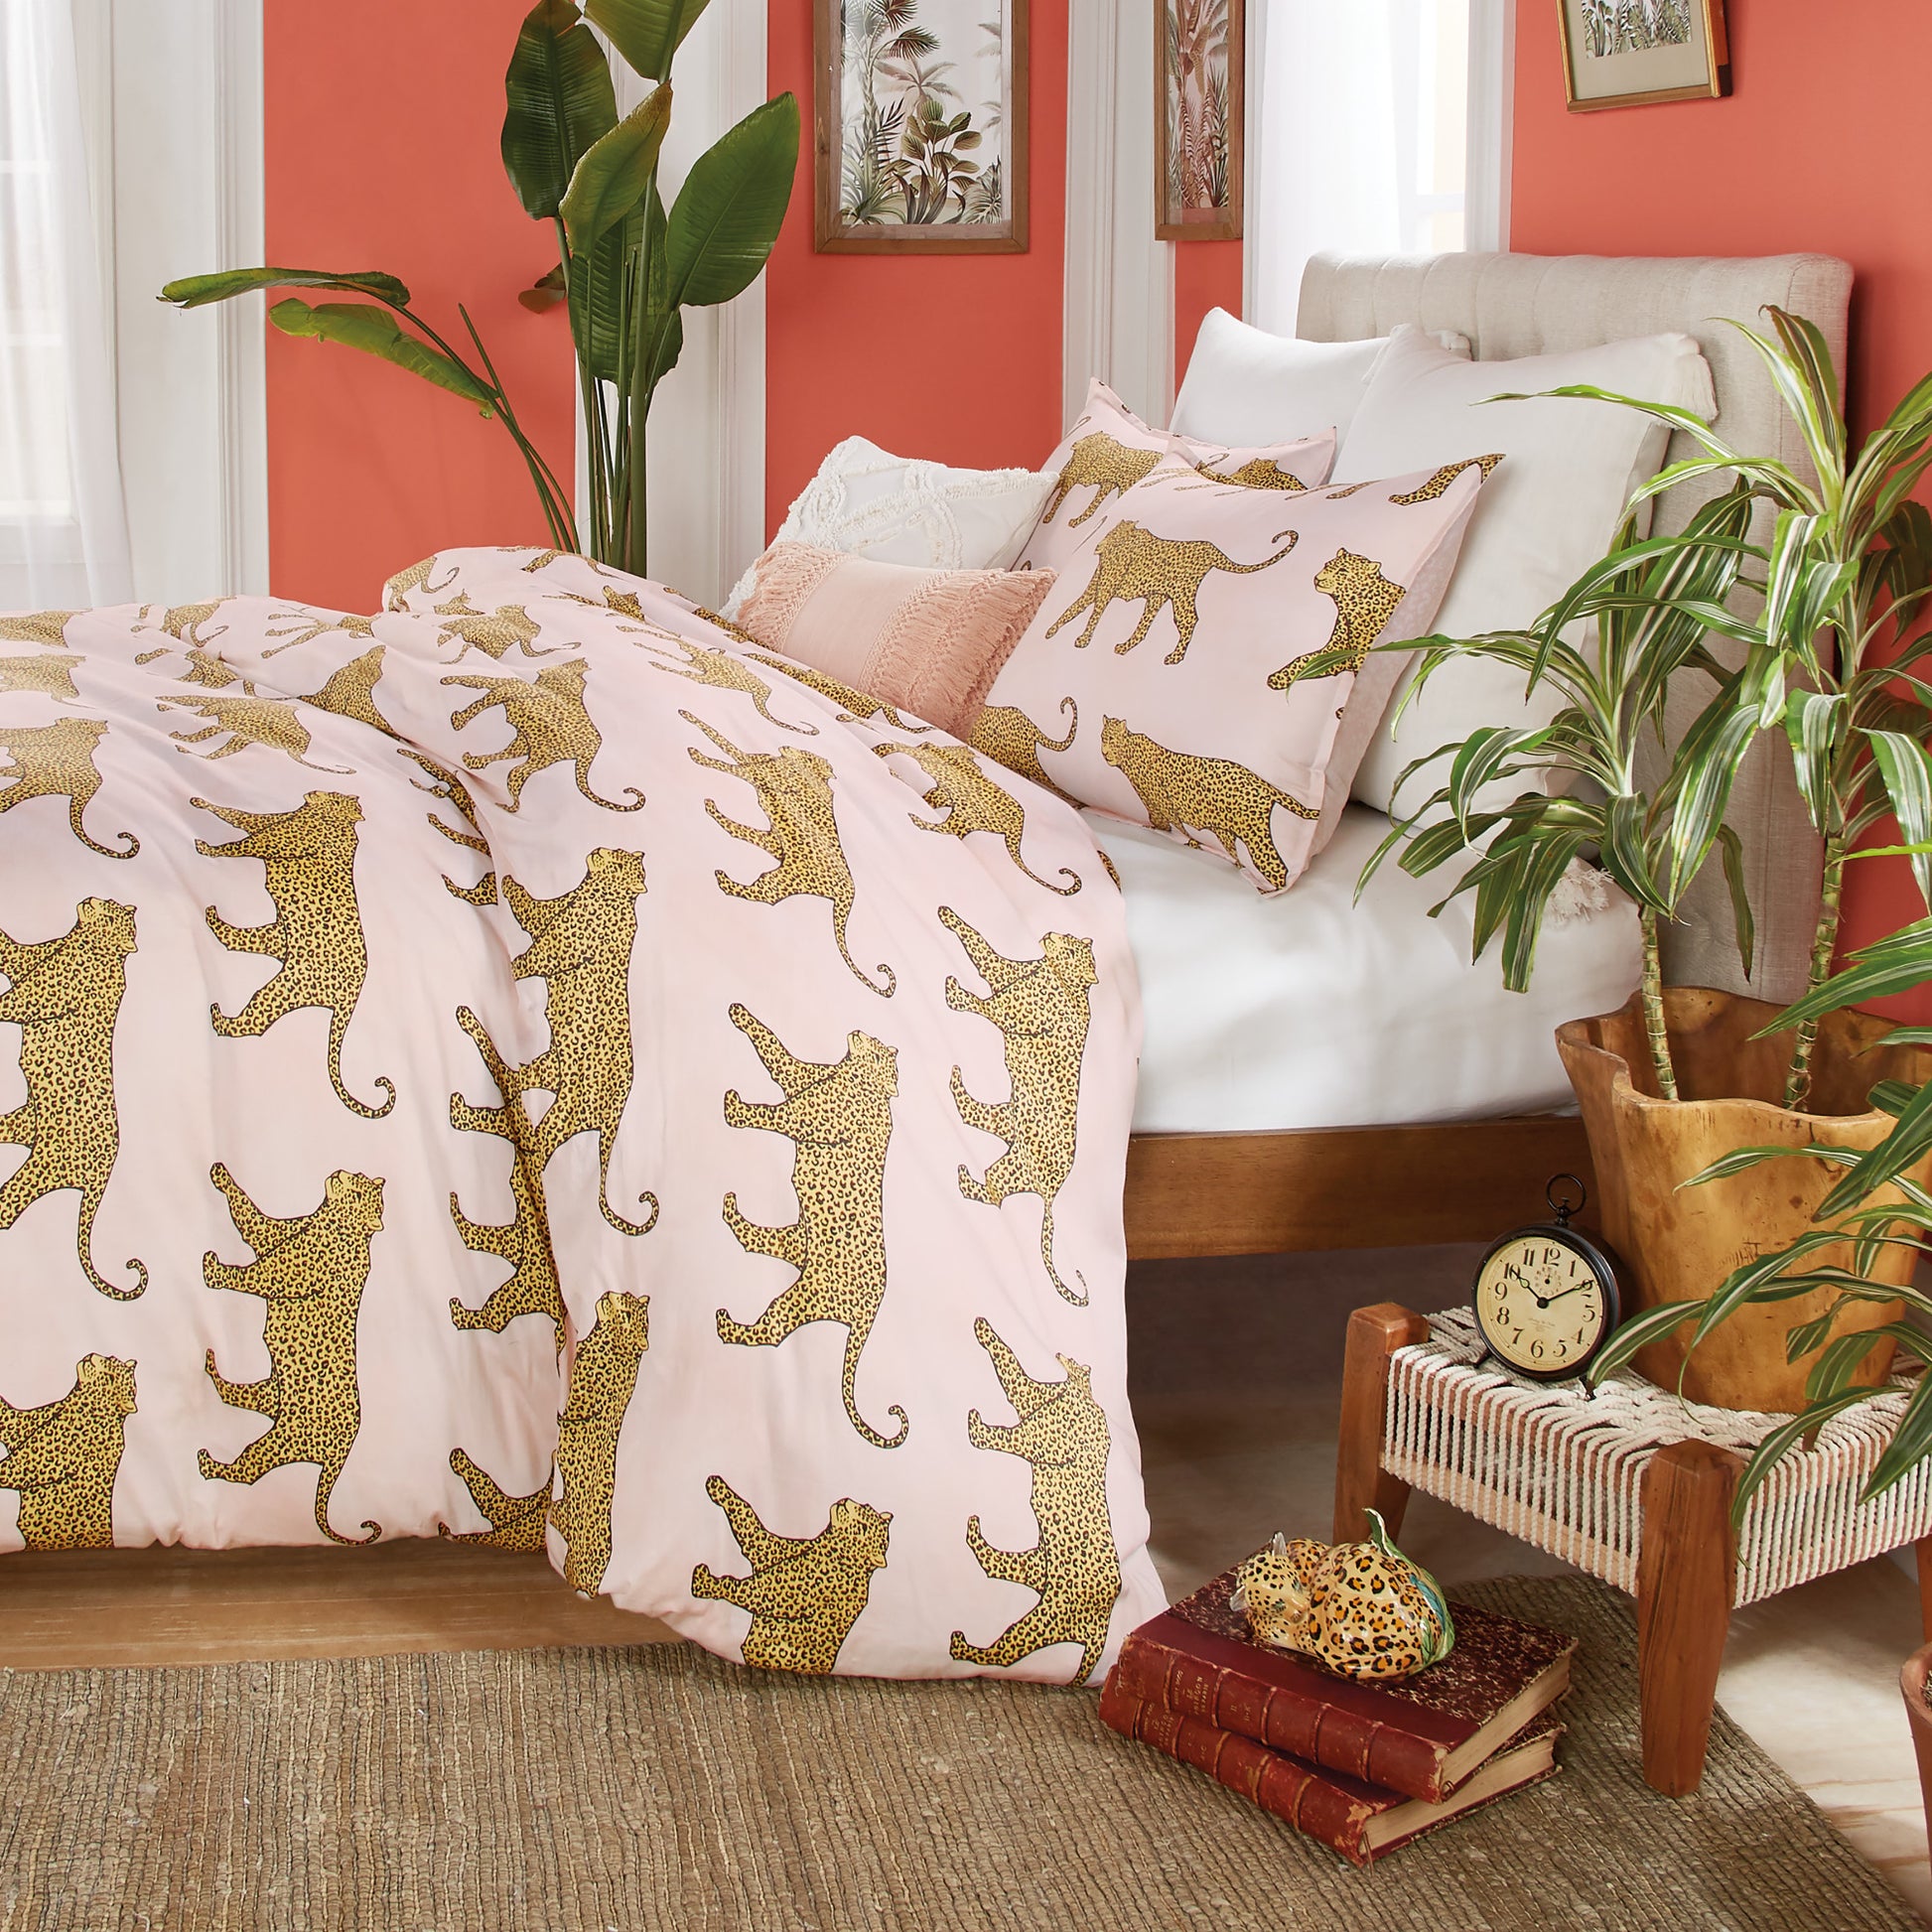 Peri Home Catwalk Comforter Bedding Collection